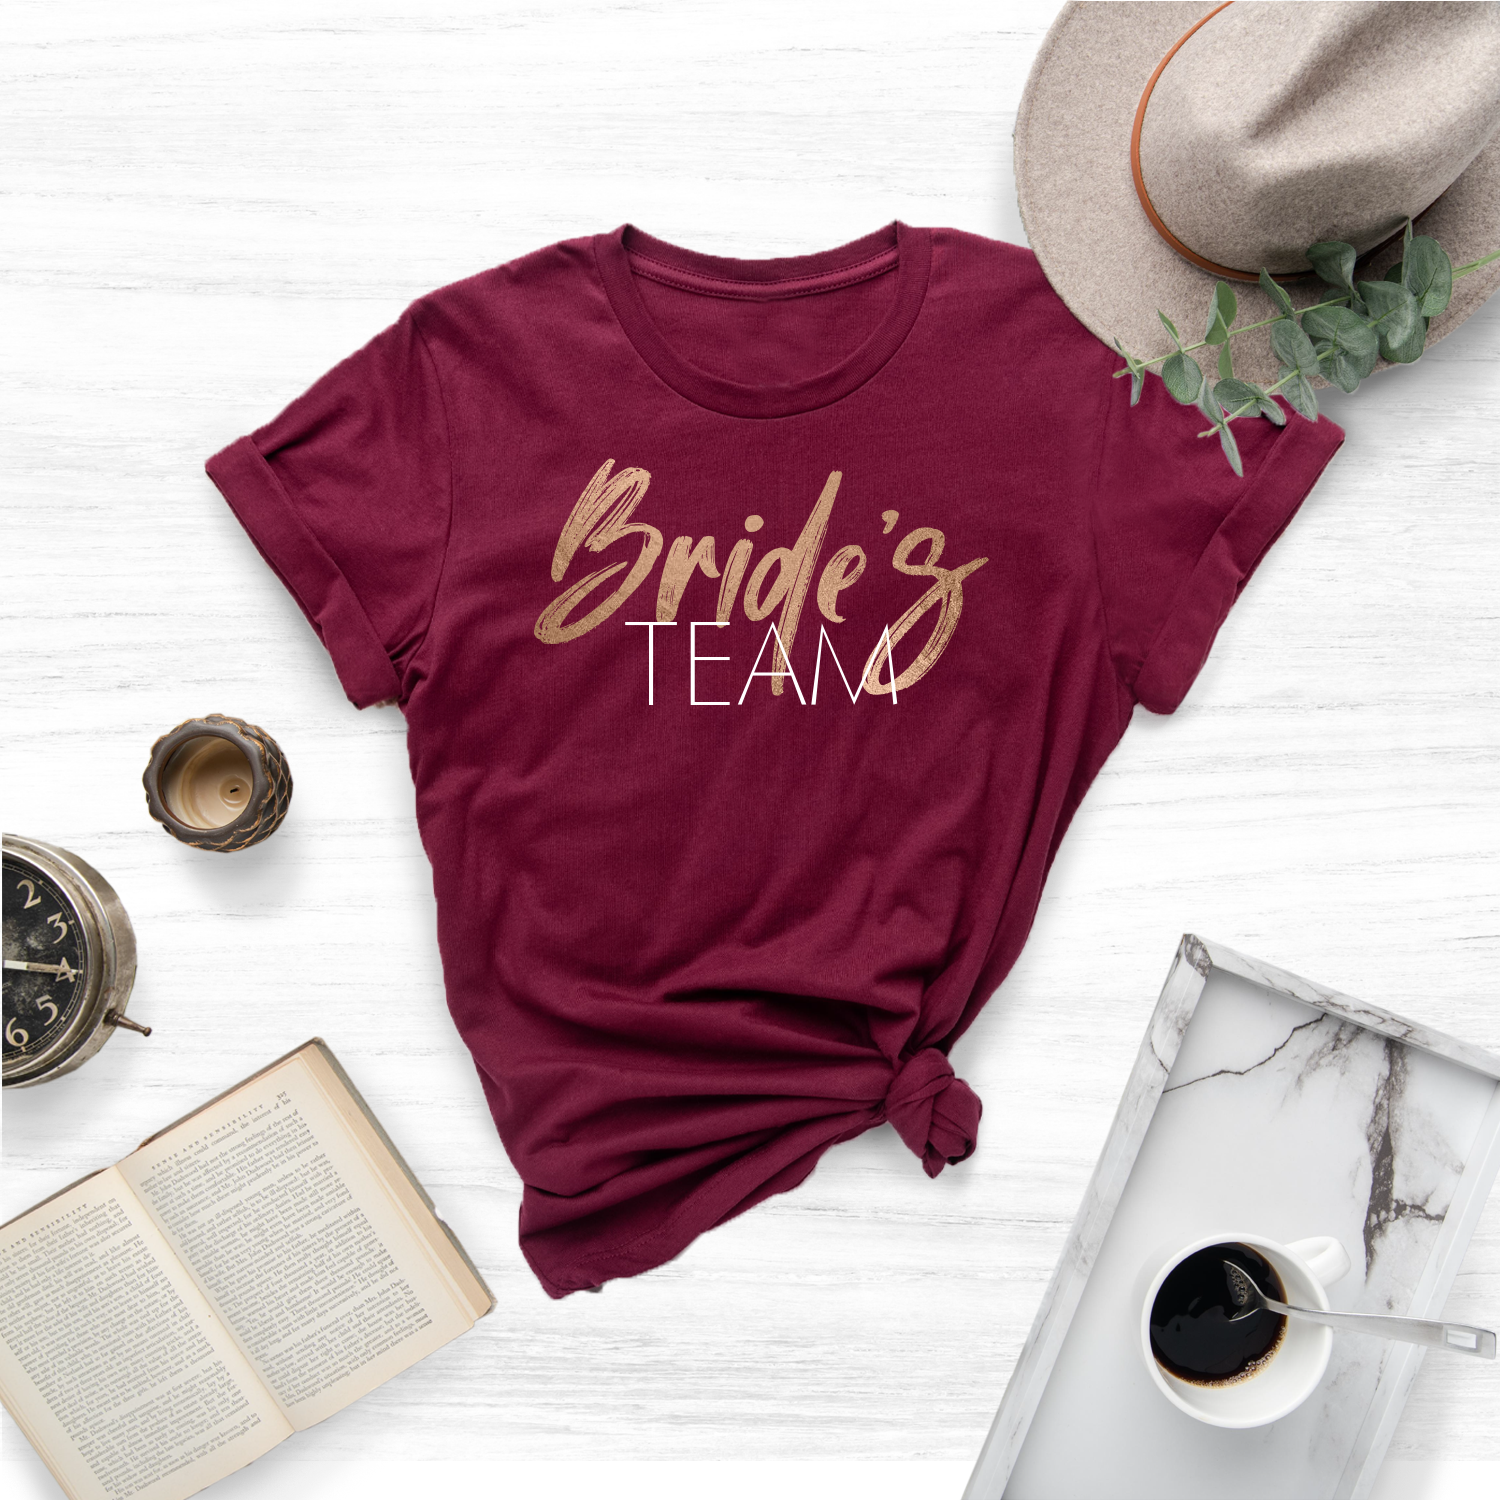 Create unforgettable memories and make your bachelorette celebration truly special with custom "Bride's Team" t-shirts. These personalized tees are the perfect way to show off your bride tribe, add a touch of fun and flair to your festivities, and commemorate this exciting chapter in the bride-to-be's life.